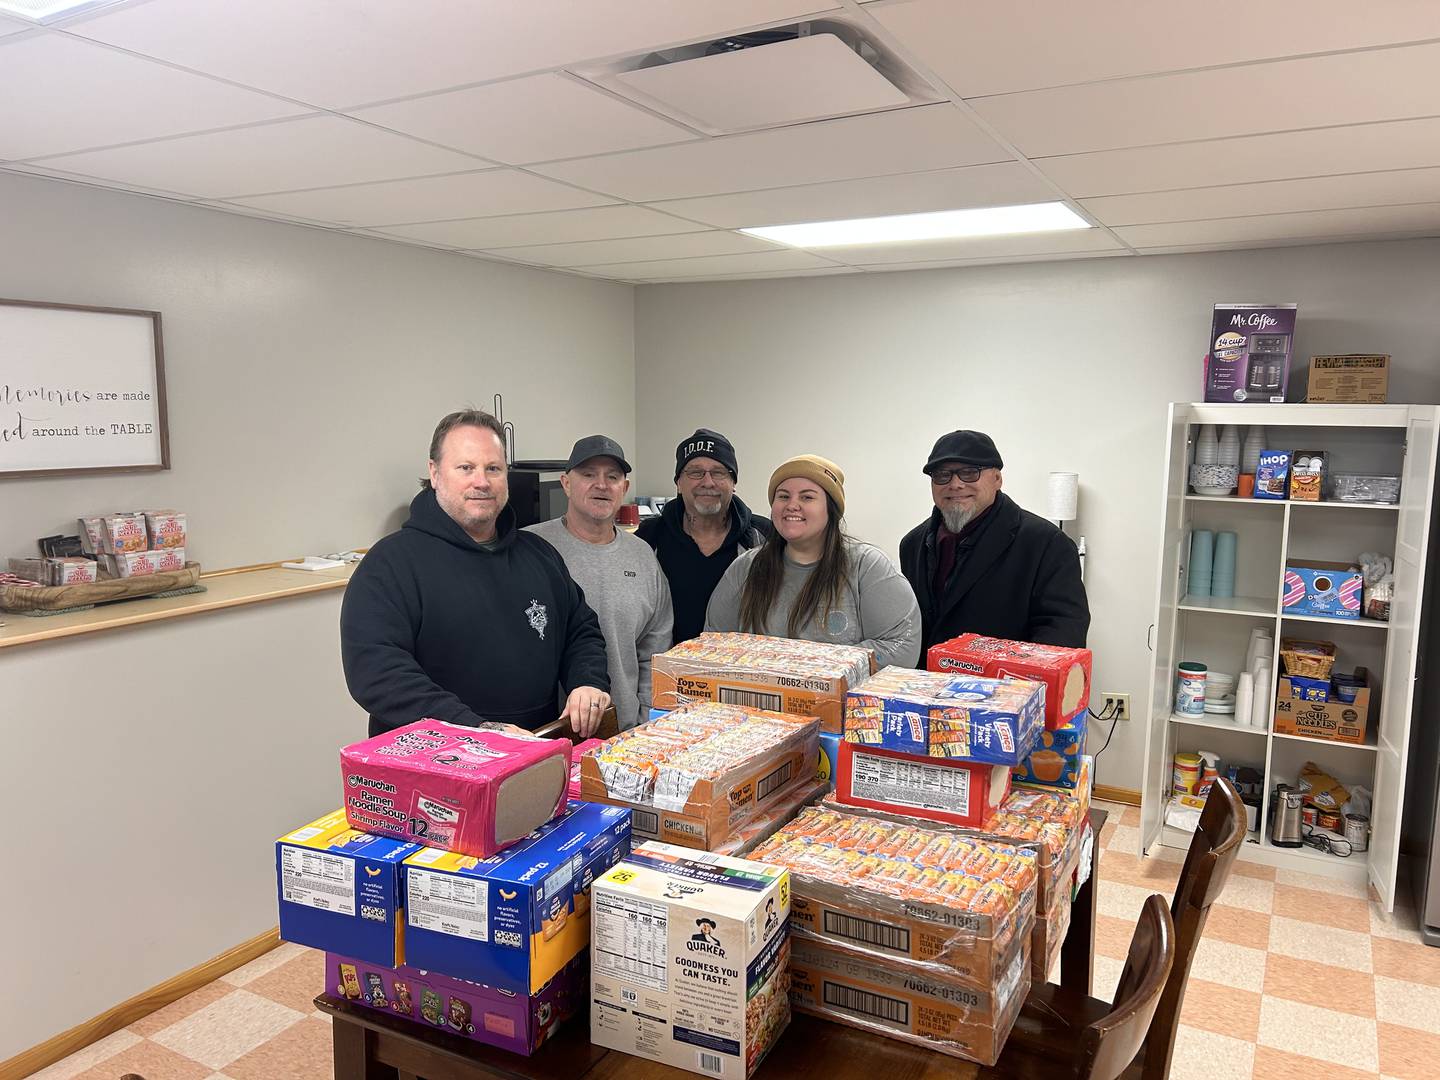 The Brothers and Sisters of The Independent Order of Odd Fellows Ottawa 41 Lodge supported Arukah Institute’s Living Room with a donation of non-perishable food items.